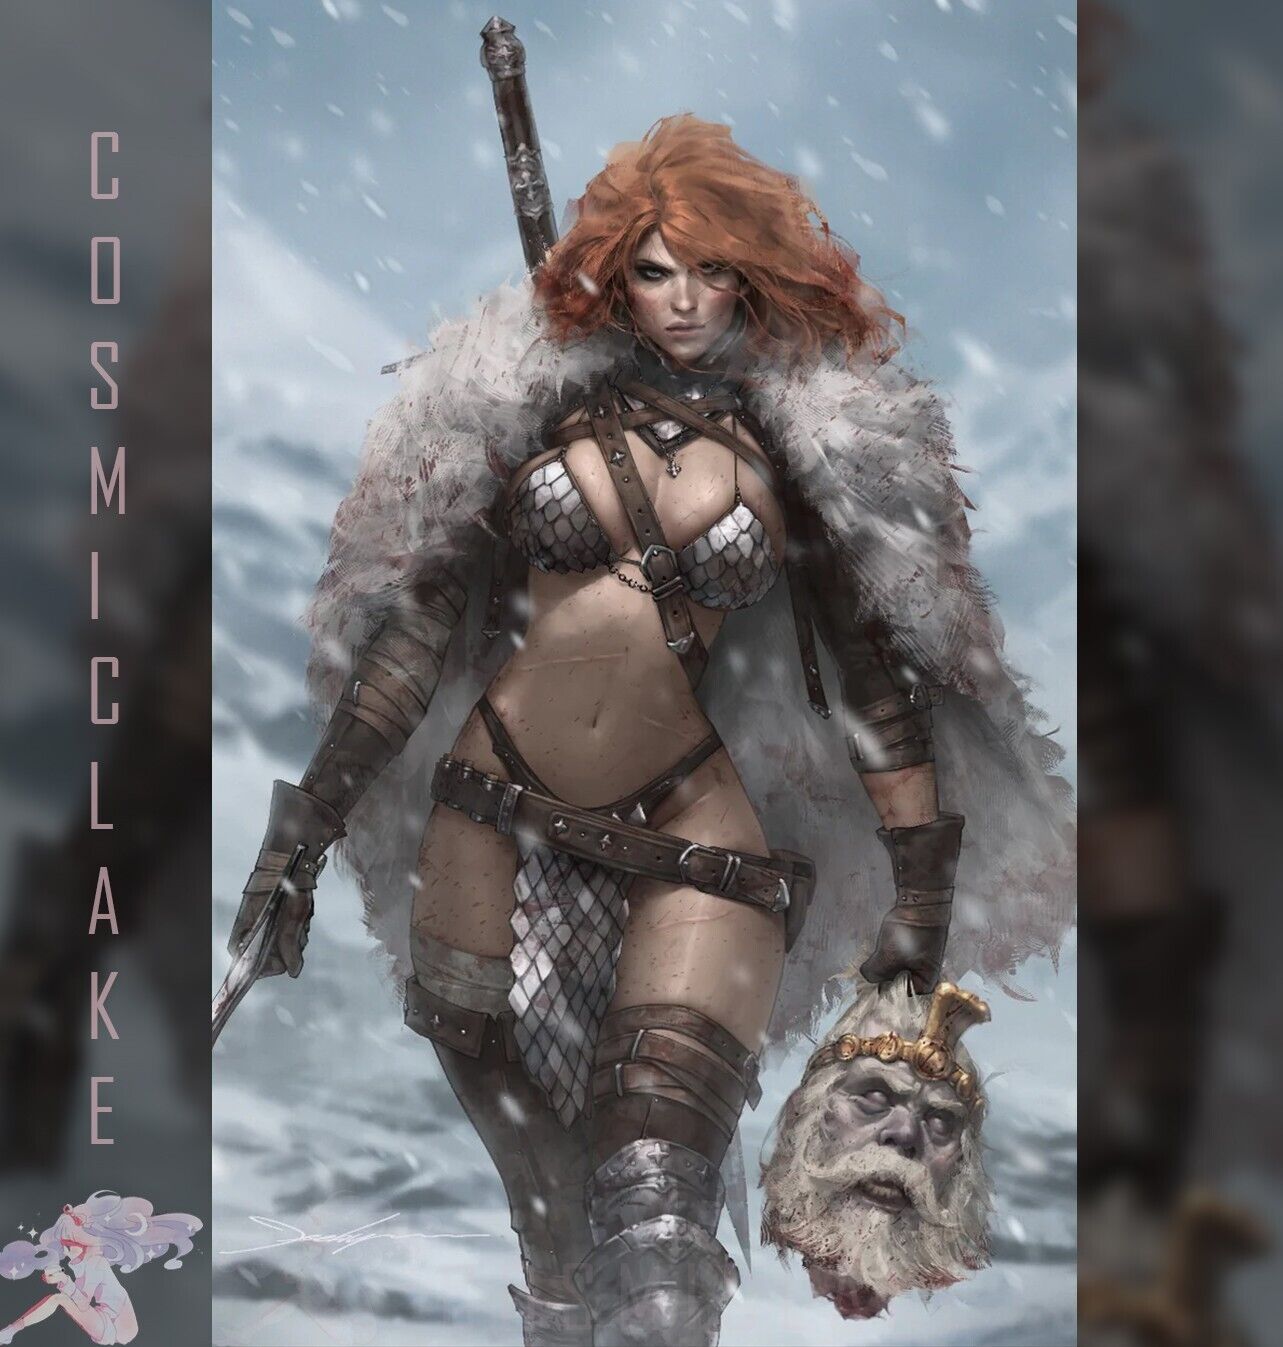 RED SONJA EMPIRE OF THE DAMNED #1 JEHEYUNG LEE VIRGIN VARIANT PREORDER 4/3☪